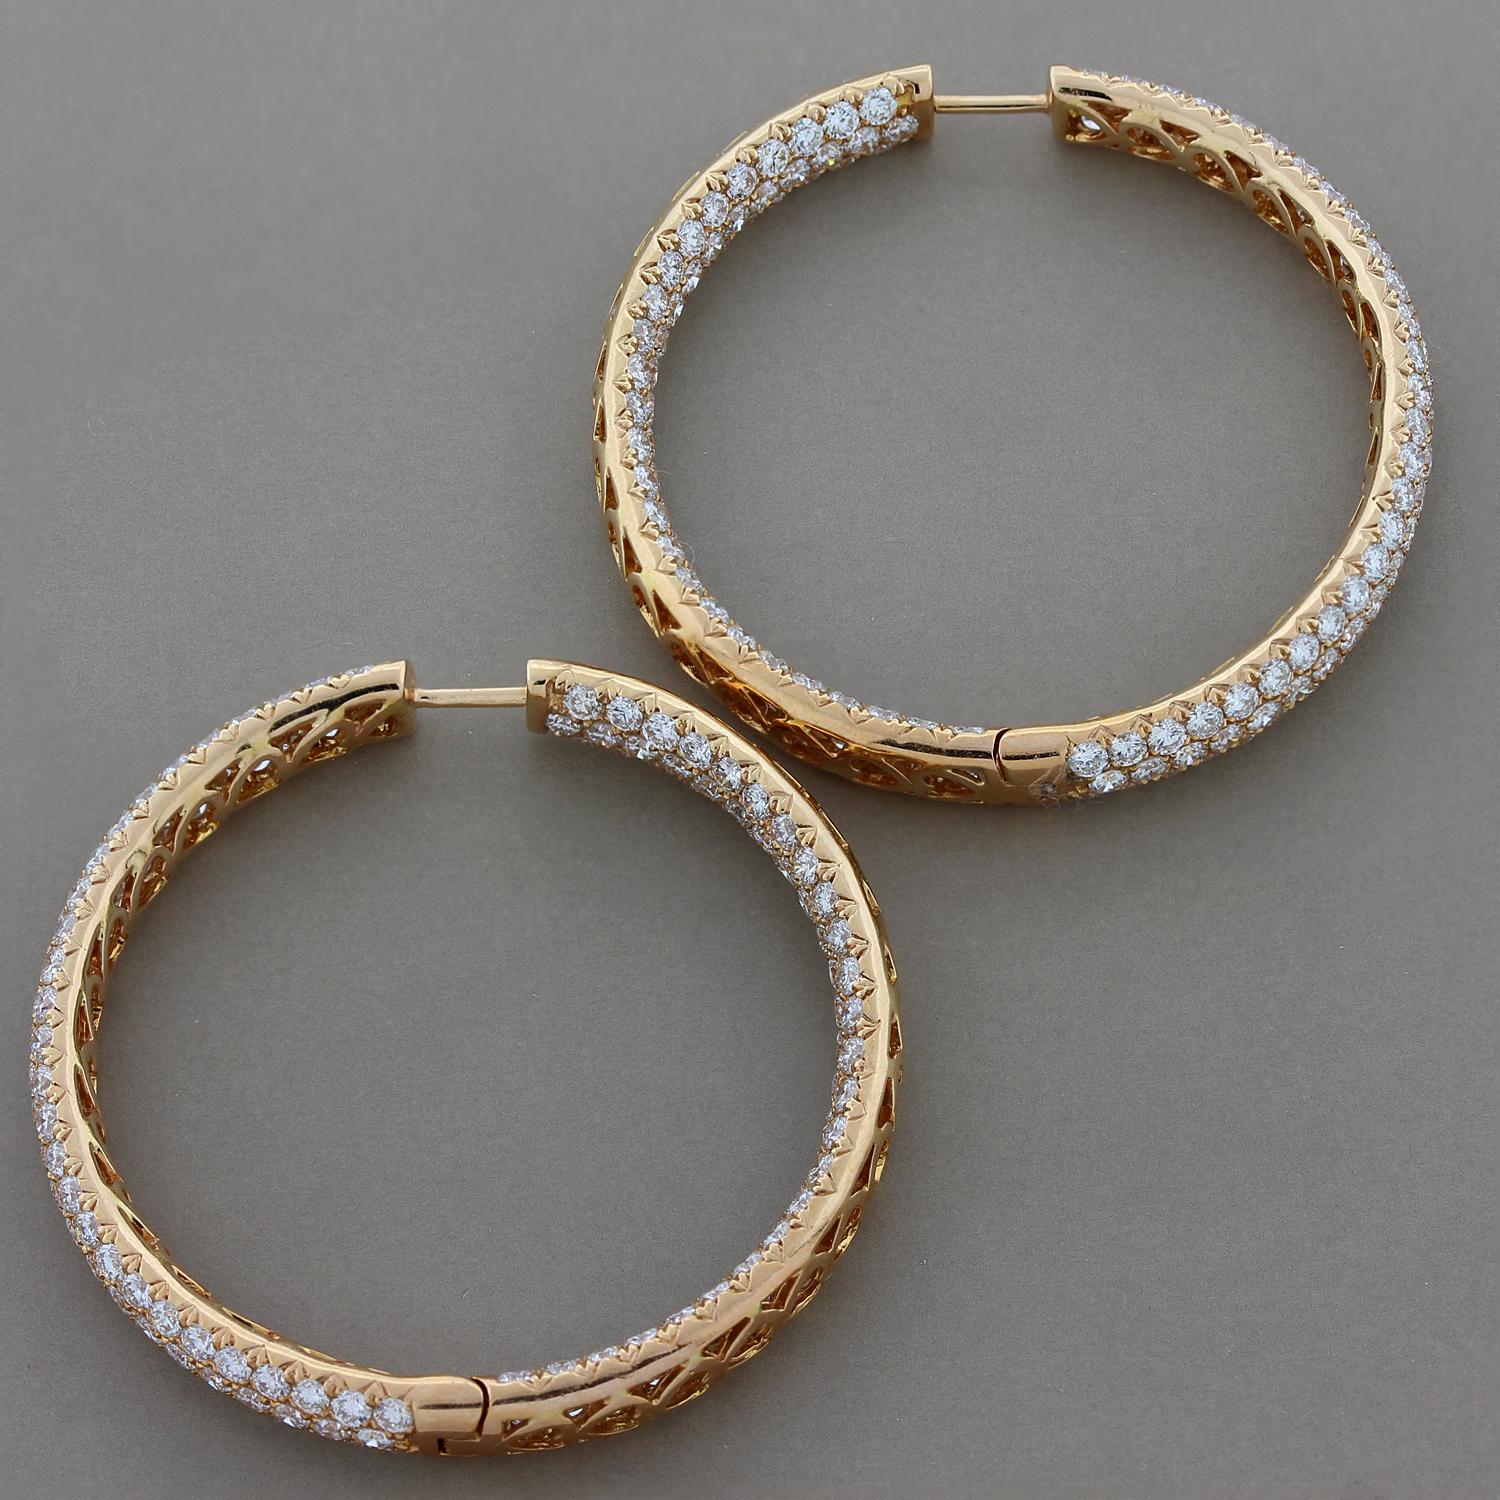 Magnificent Pave Diamond Gold Hoop Inside-Out Earrings In New Condition For Sale In Beverly Hills, CA